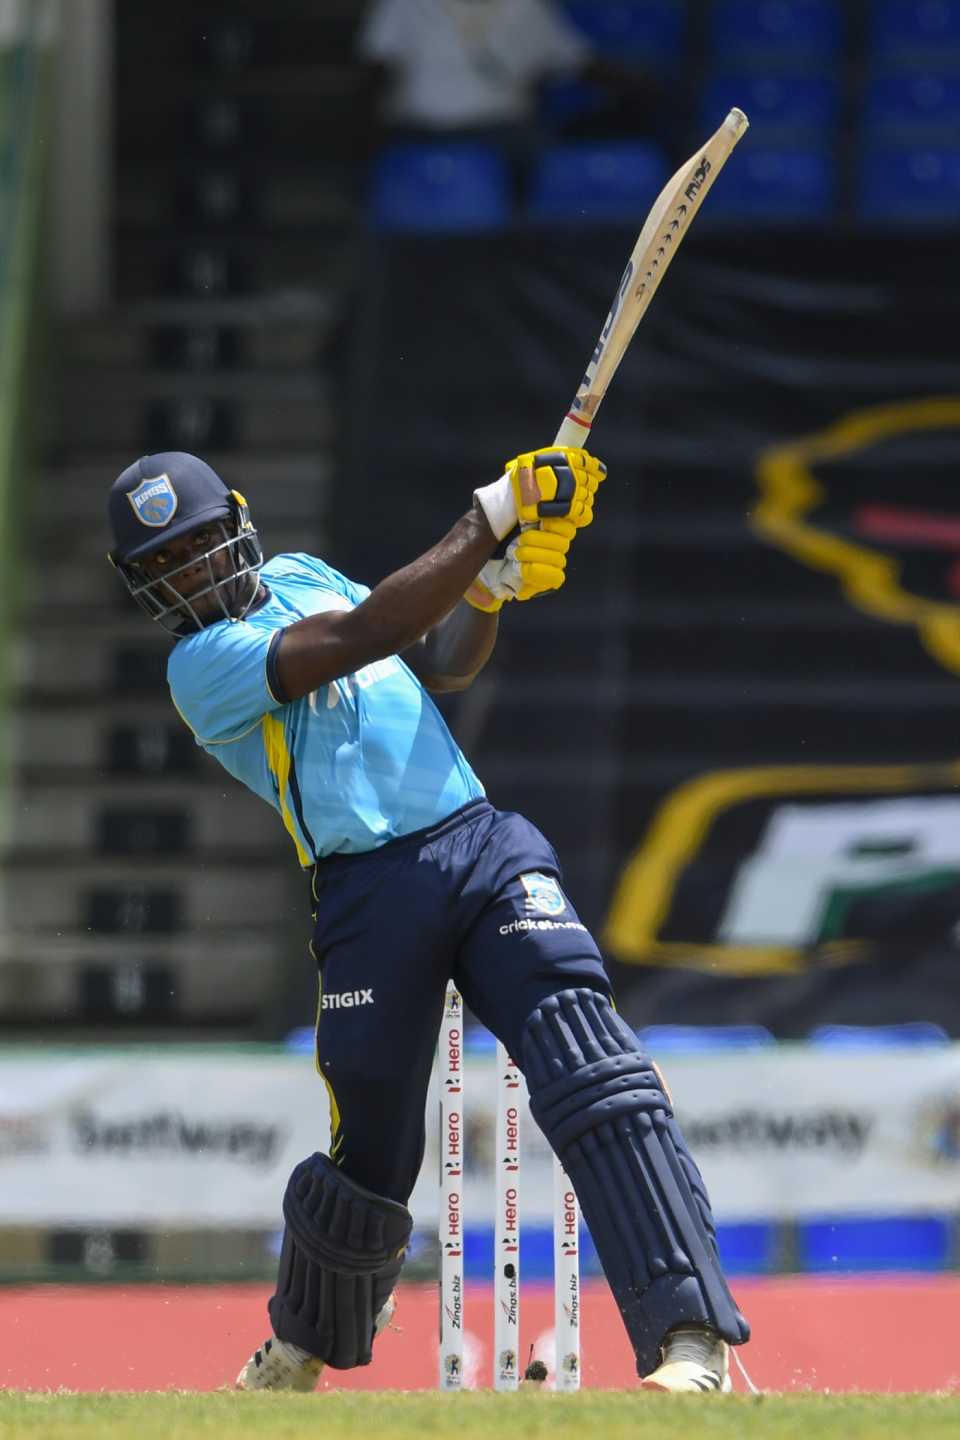 Andre Fletcher blasts one over the top, Trinbago Knight Riders v St Lucia Kings, CPL 2021, August 31, 2021